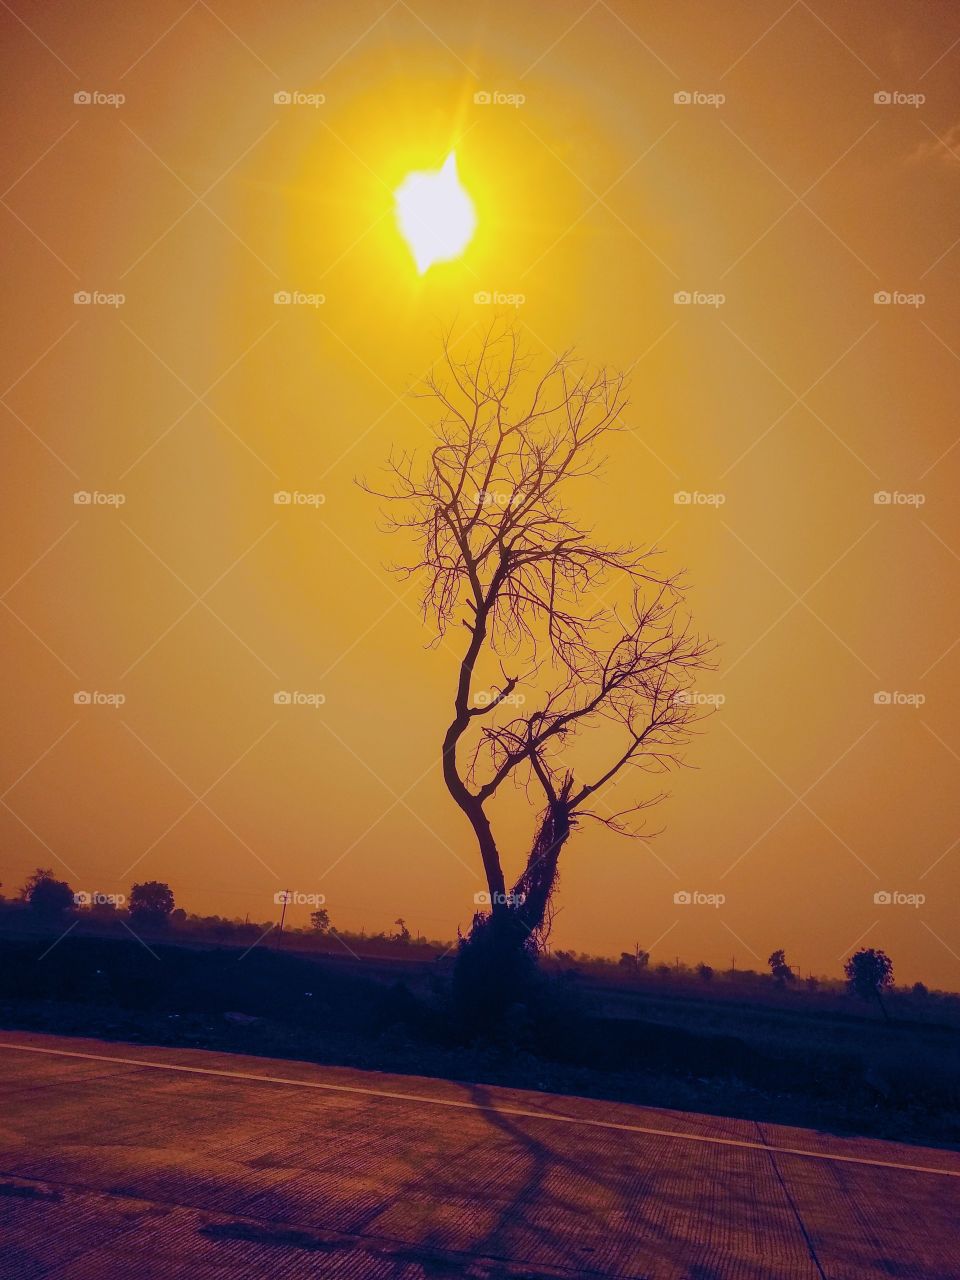 the sunset with tree and yellow filter